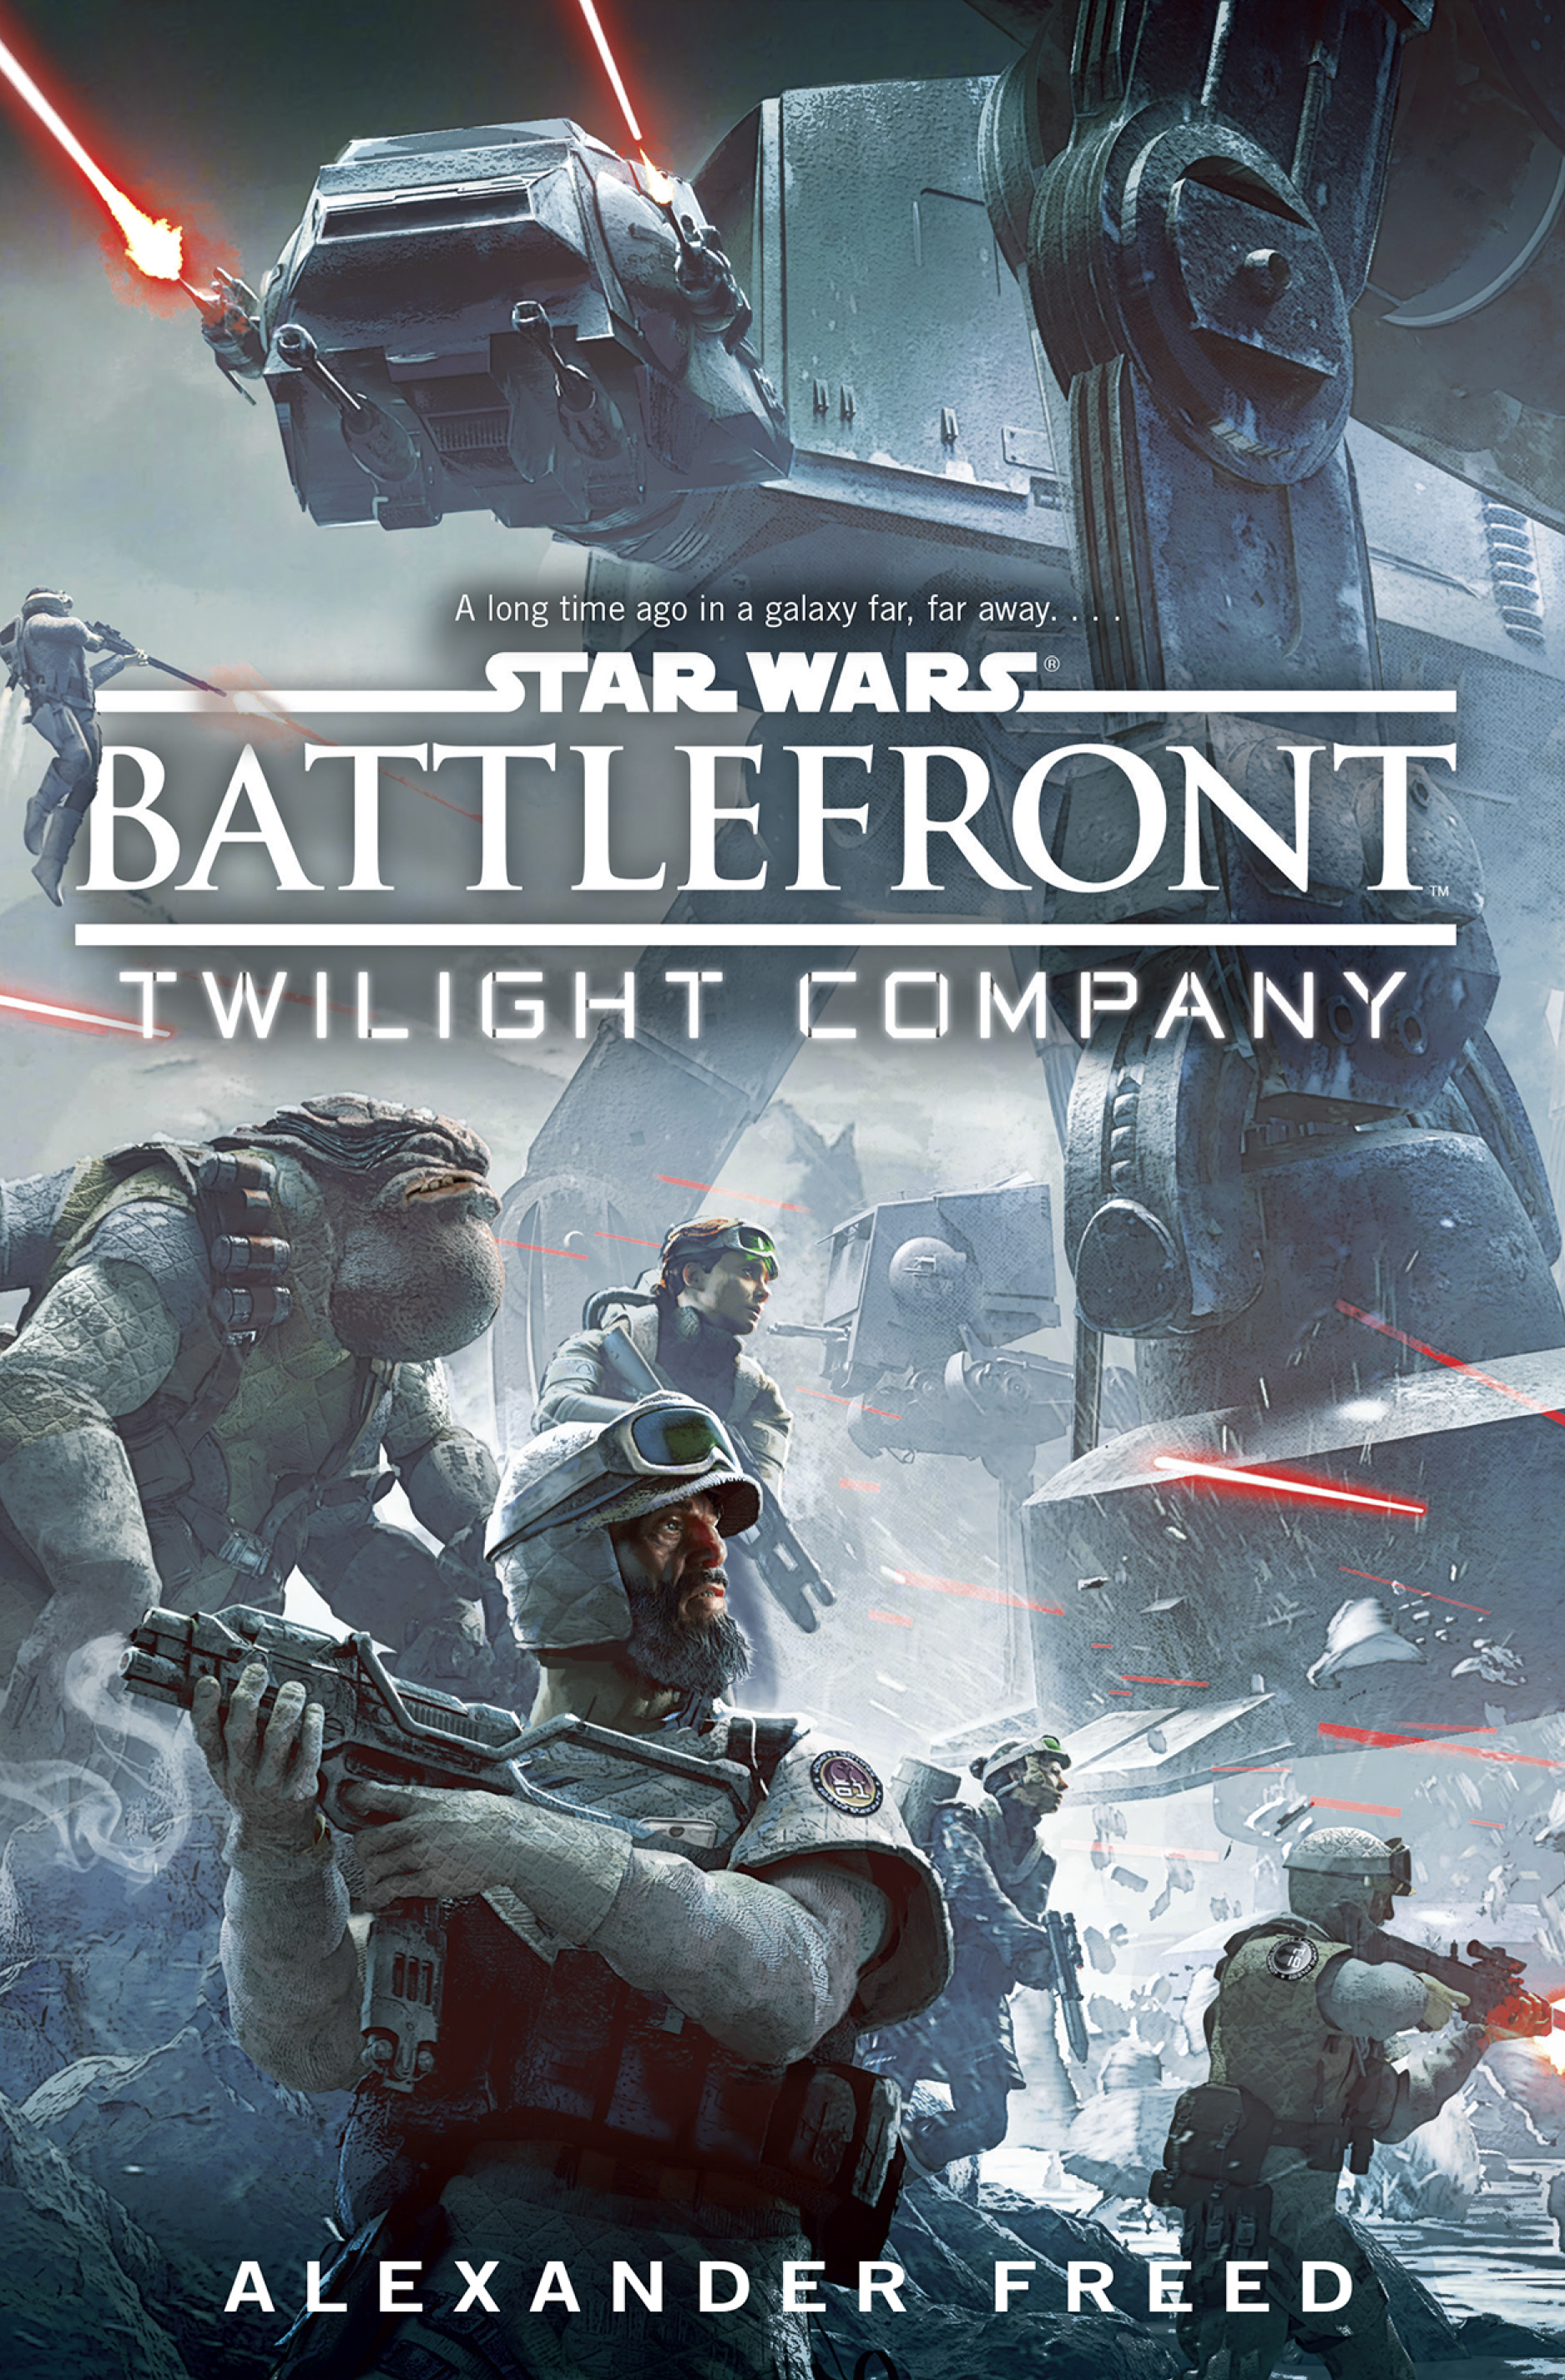 Star Wars Battlefront: Twilight Company – A Different But No Less Excellent Star Wars Novel!